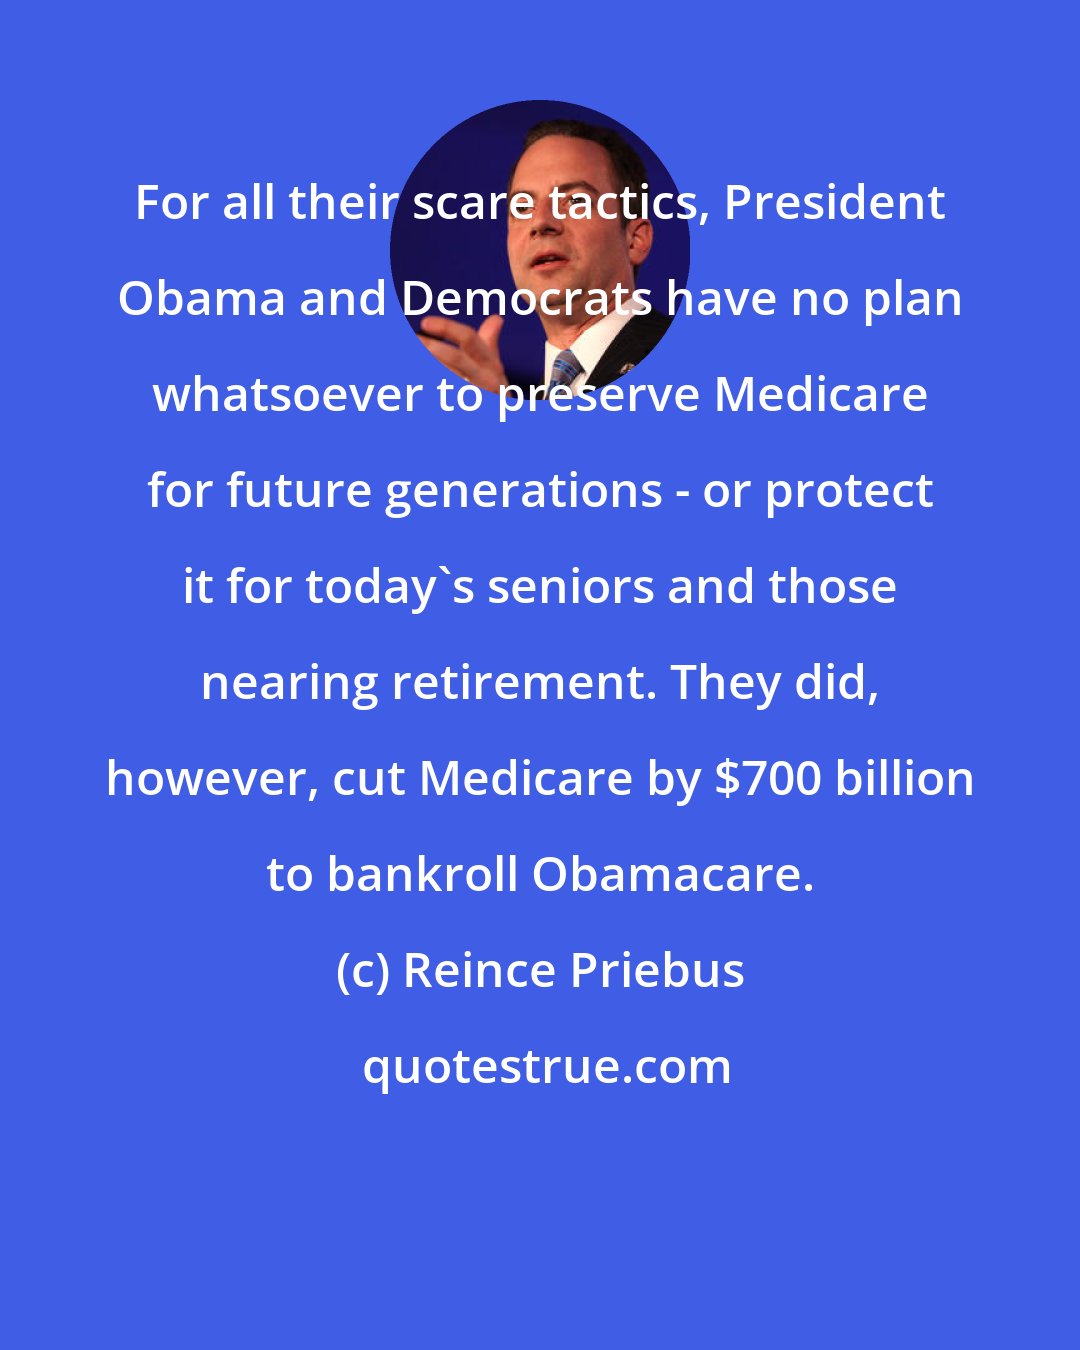 Reince Priebus: For all their scare tactics, President Obama and Democrats have no plan whatsoever to preserve Medicare for future generations - or protect it for today's seniors and those nearing retirement. They did, however, cut Medicare by $700 billion to bankroll Obamacare.